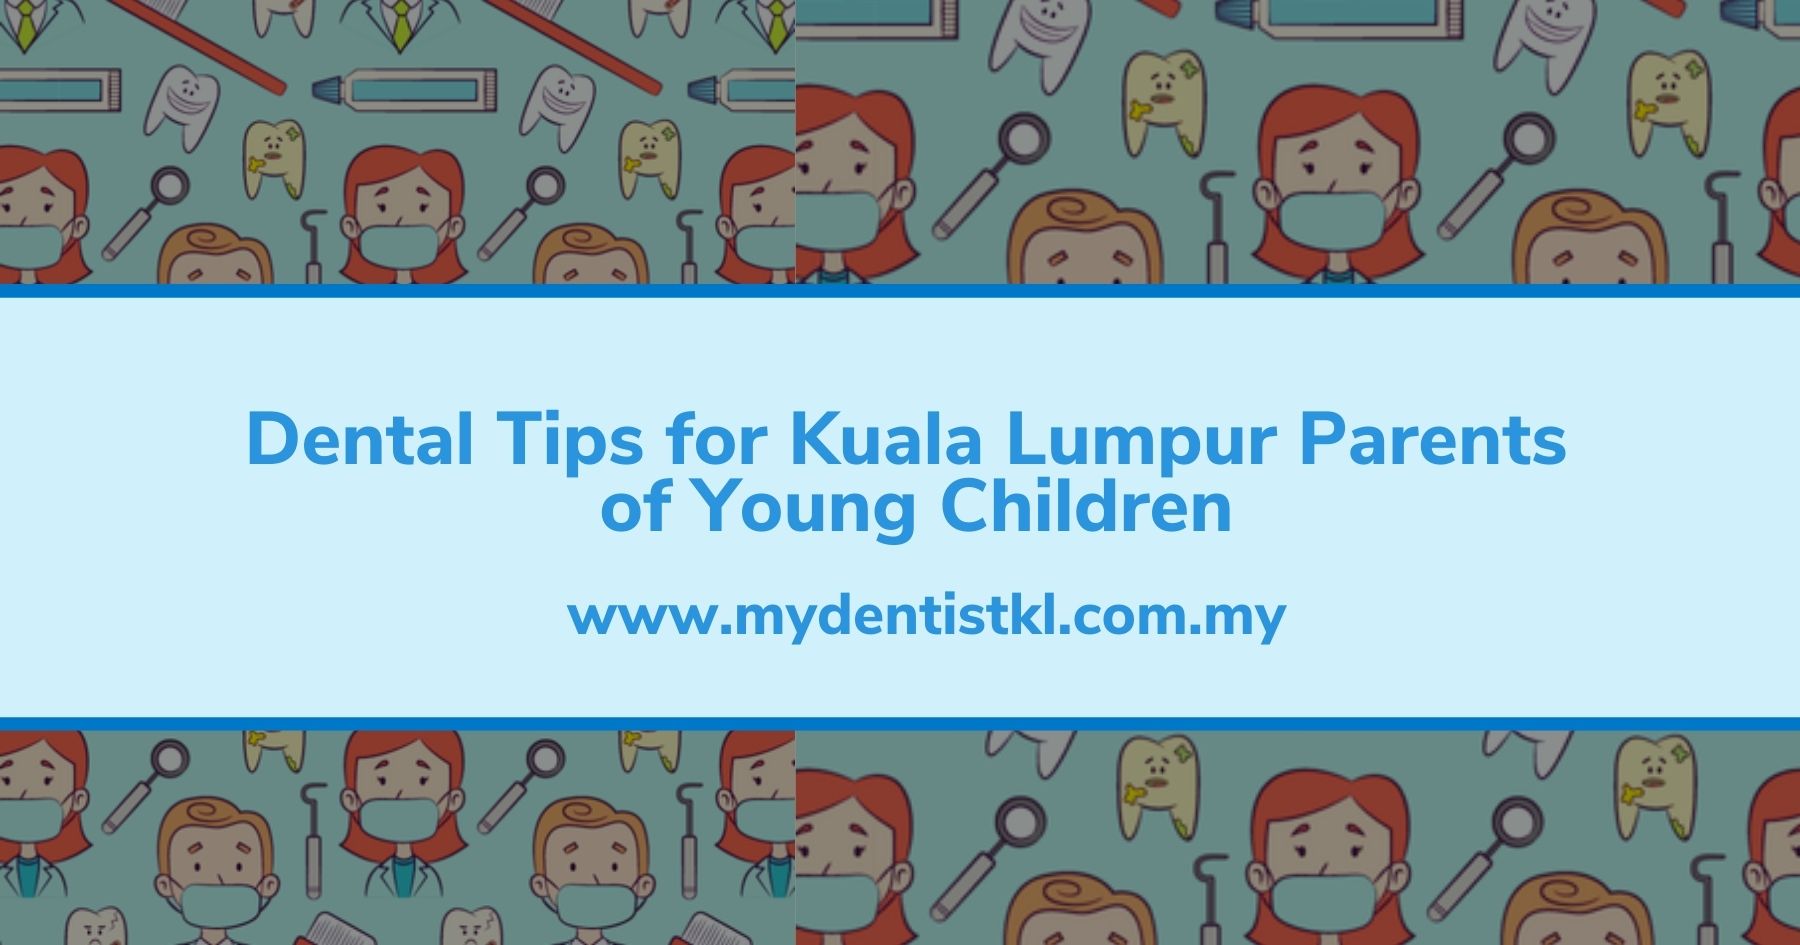 Dental Tips for Kuala Lumpur Parents of Young Children